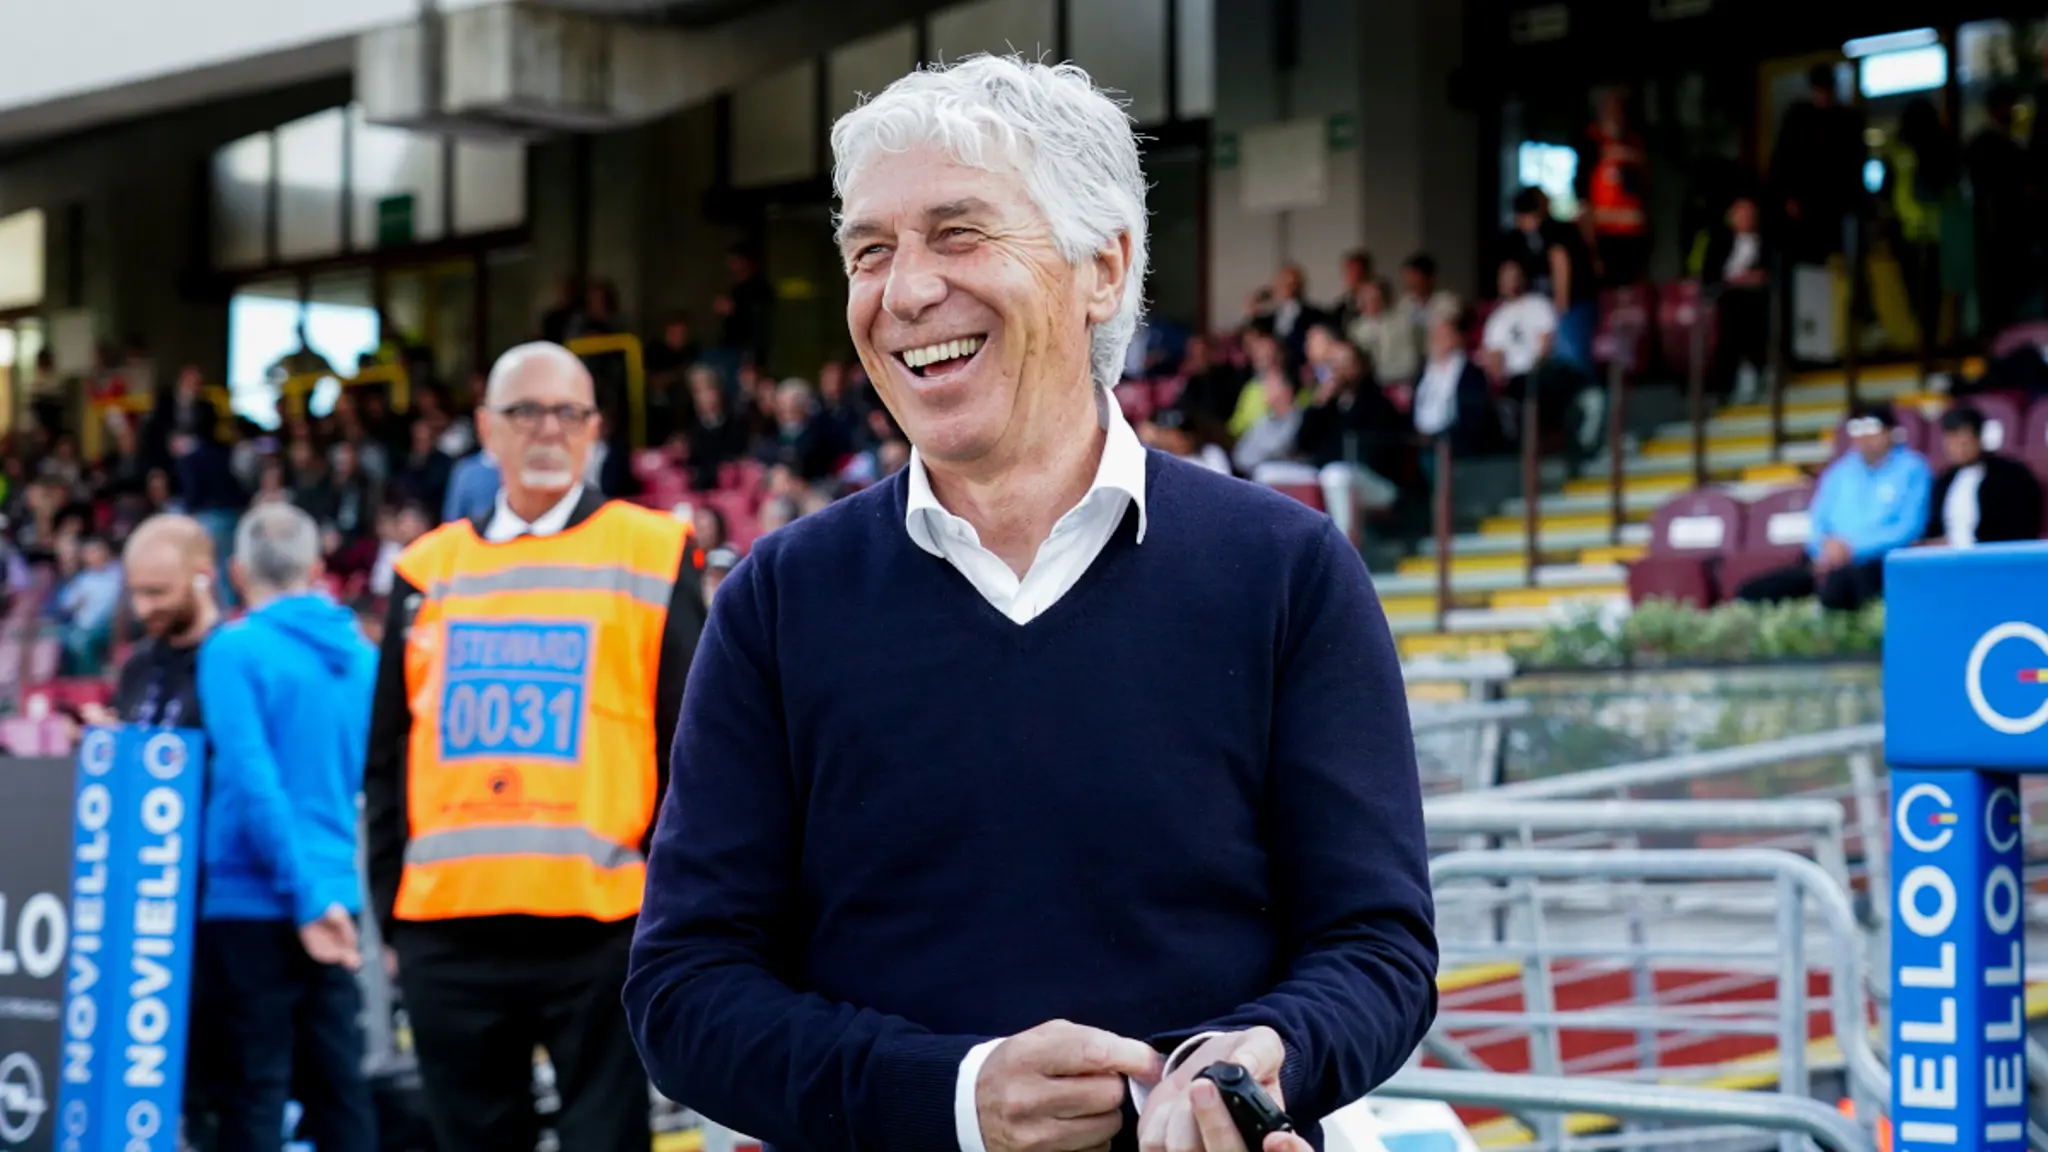 Napoli owner De Laurentiis would like to open a new multi-year cycle with the right man in the dugout and plans to attempt to lure Gian Piero Gasperini.